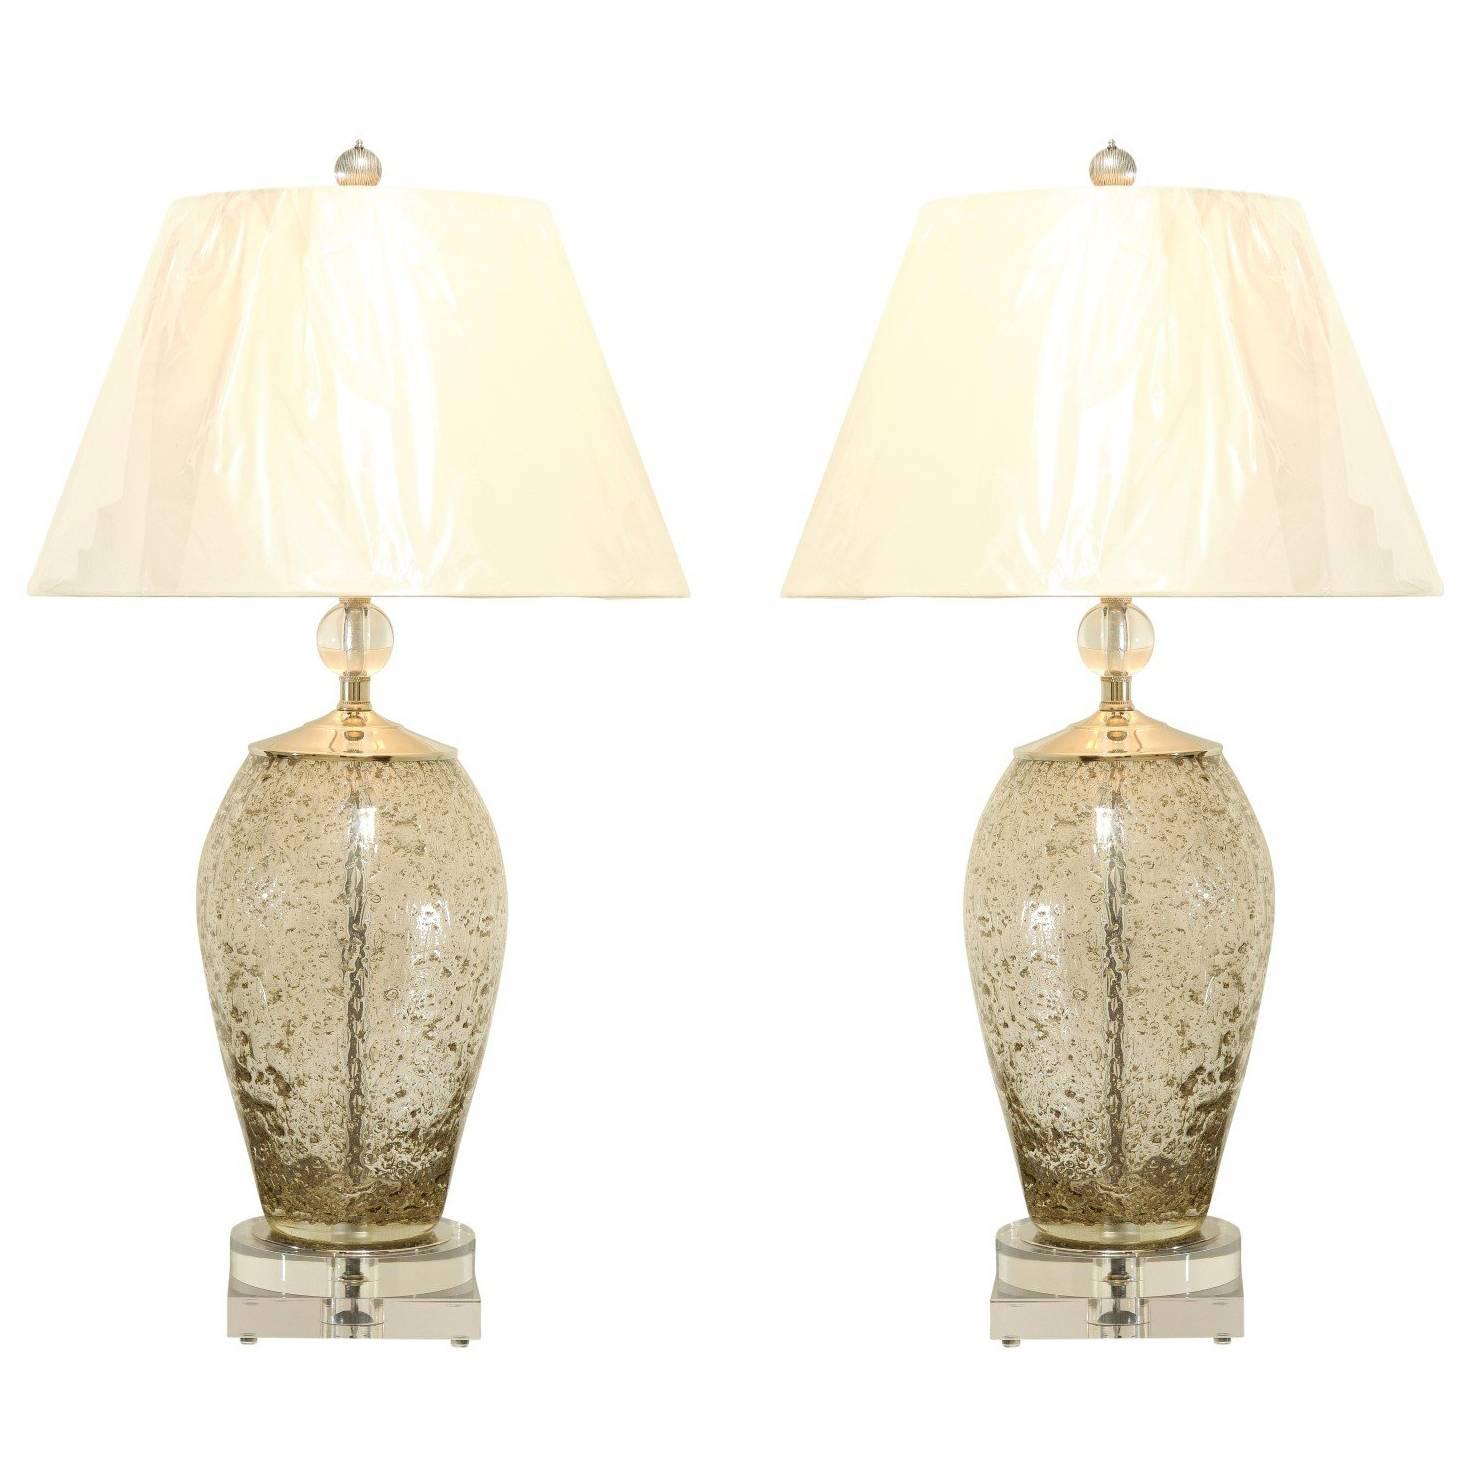 Gorgeous Pair of Italian Blown Glass Lamps with Lucite and Brass Accents